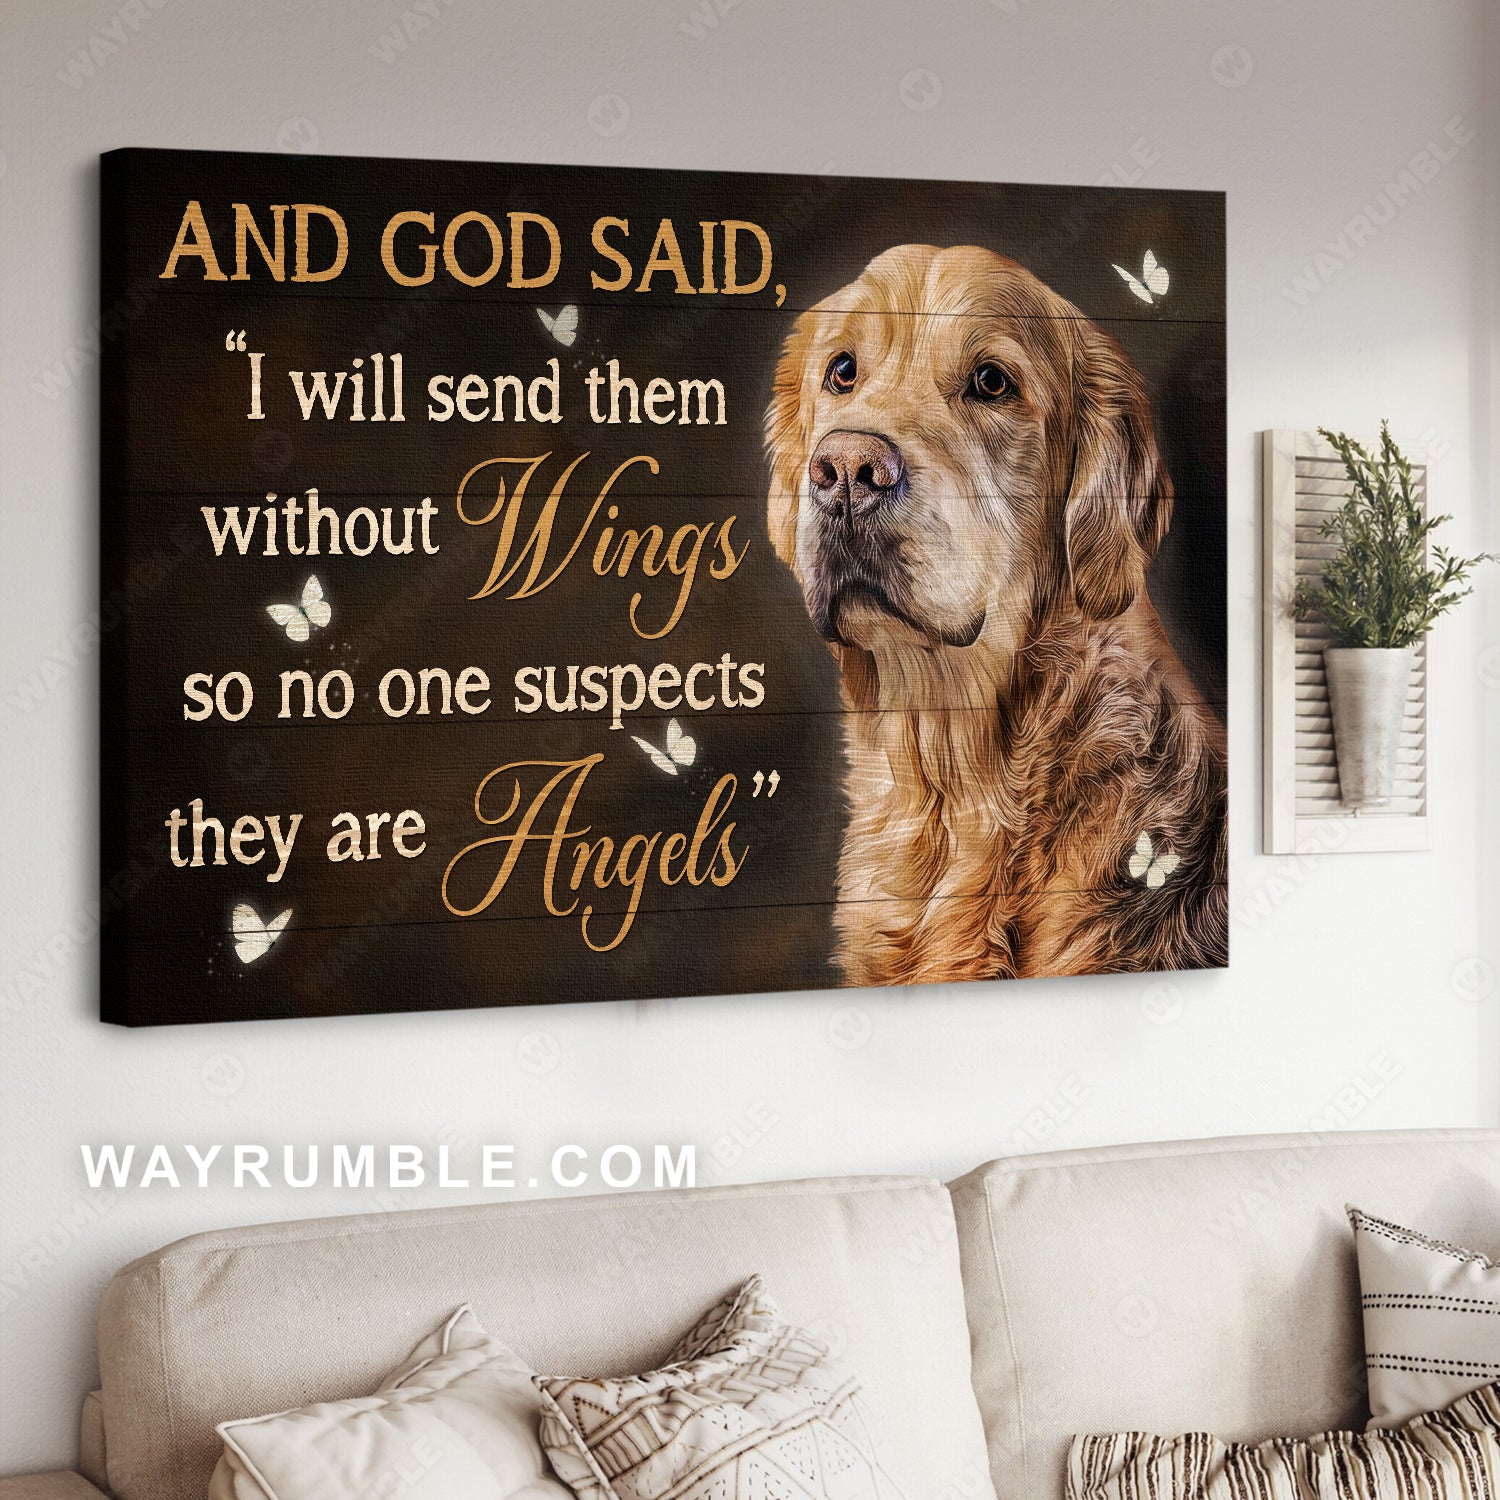 Lovely Golden Retriever, Beautiful gift, White butterfly, And God said - Jesus Landscape Canvas Prints, Home Decor Wall Art